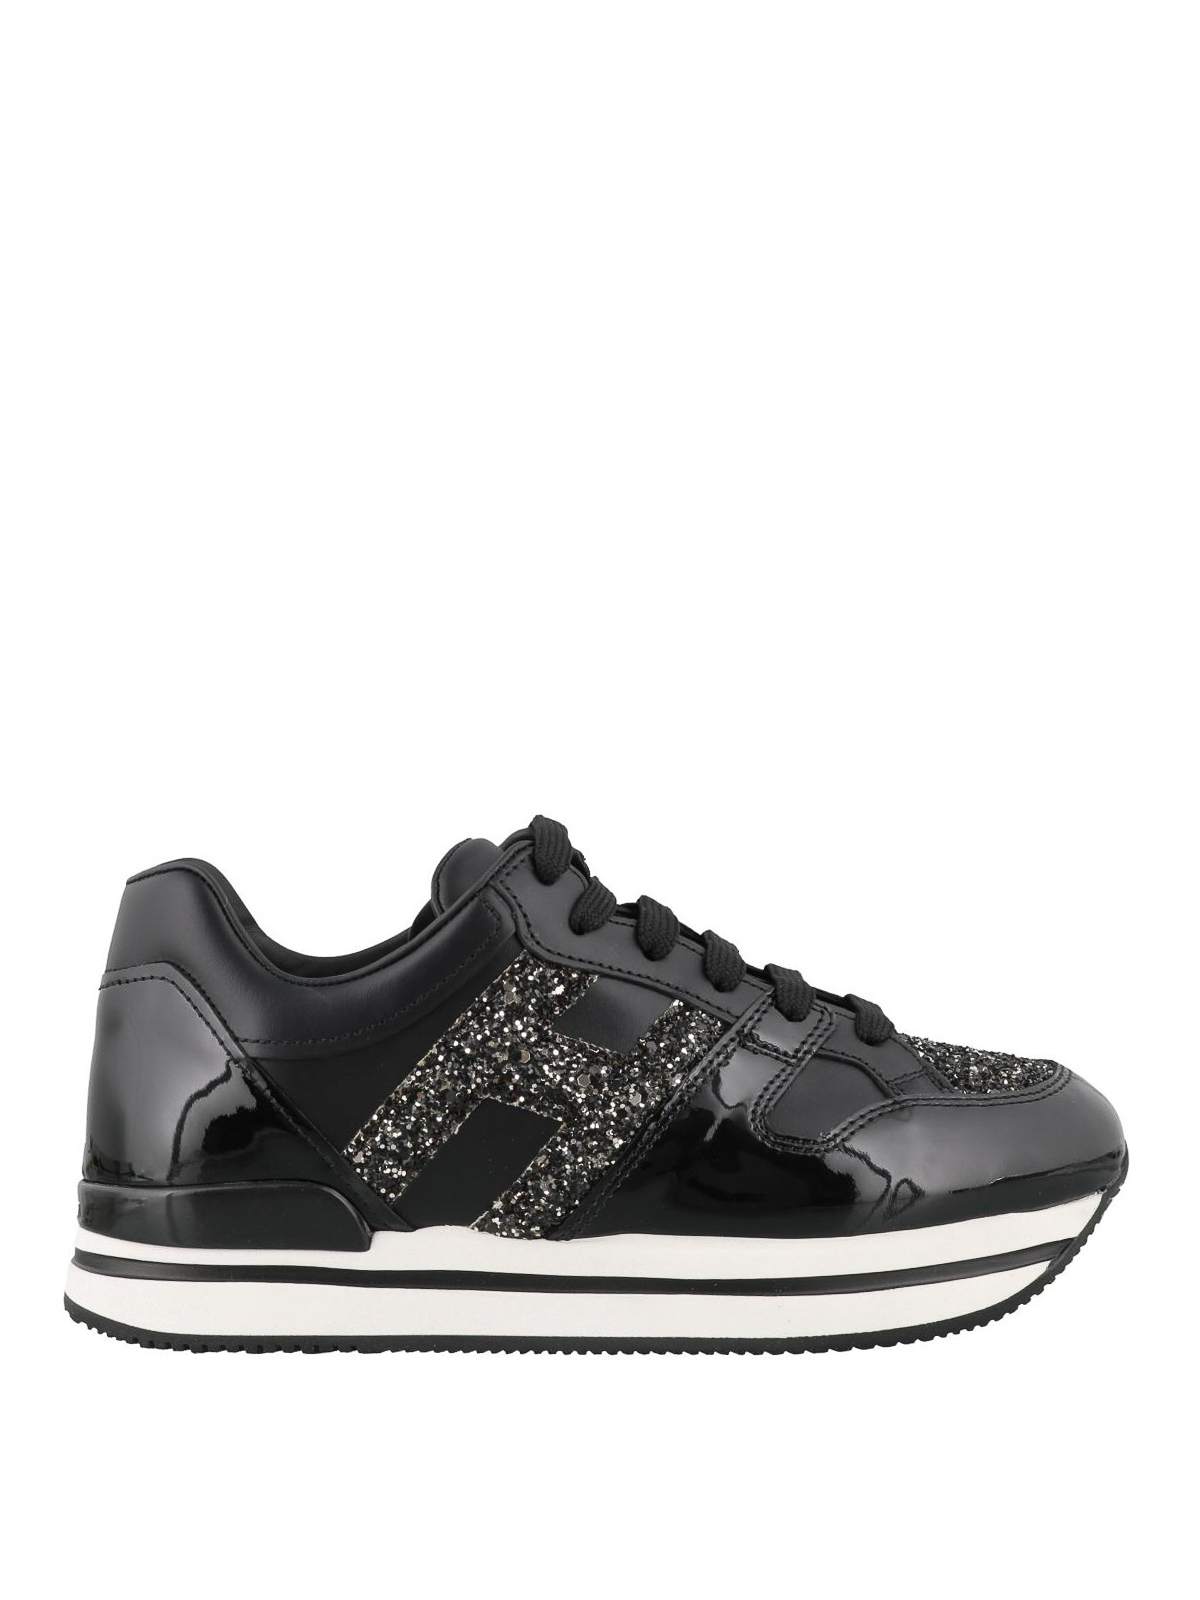 Trainers Hogan - Glitter H patent leather H222 sneakers ...